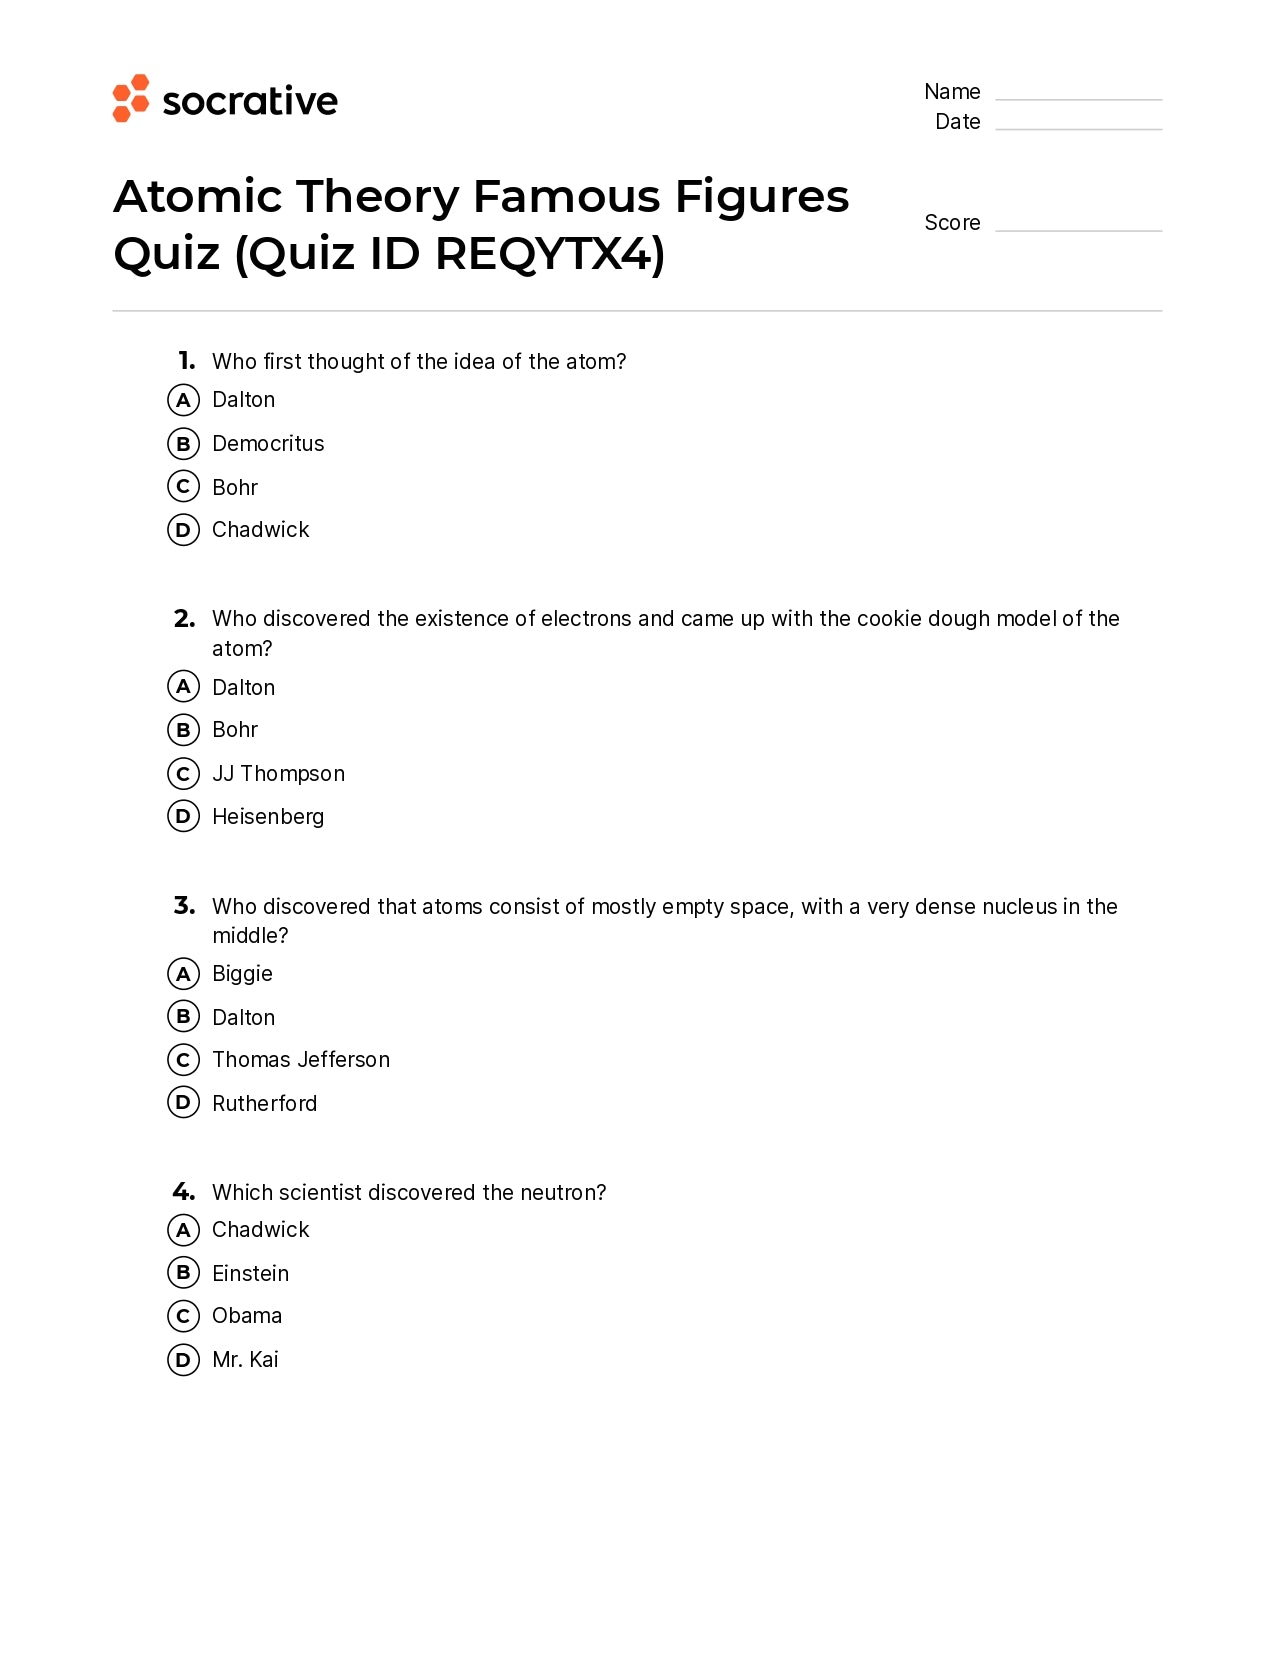 Atomic Theory Famous Figures Quiz